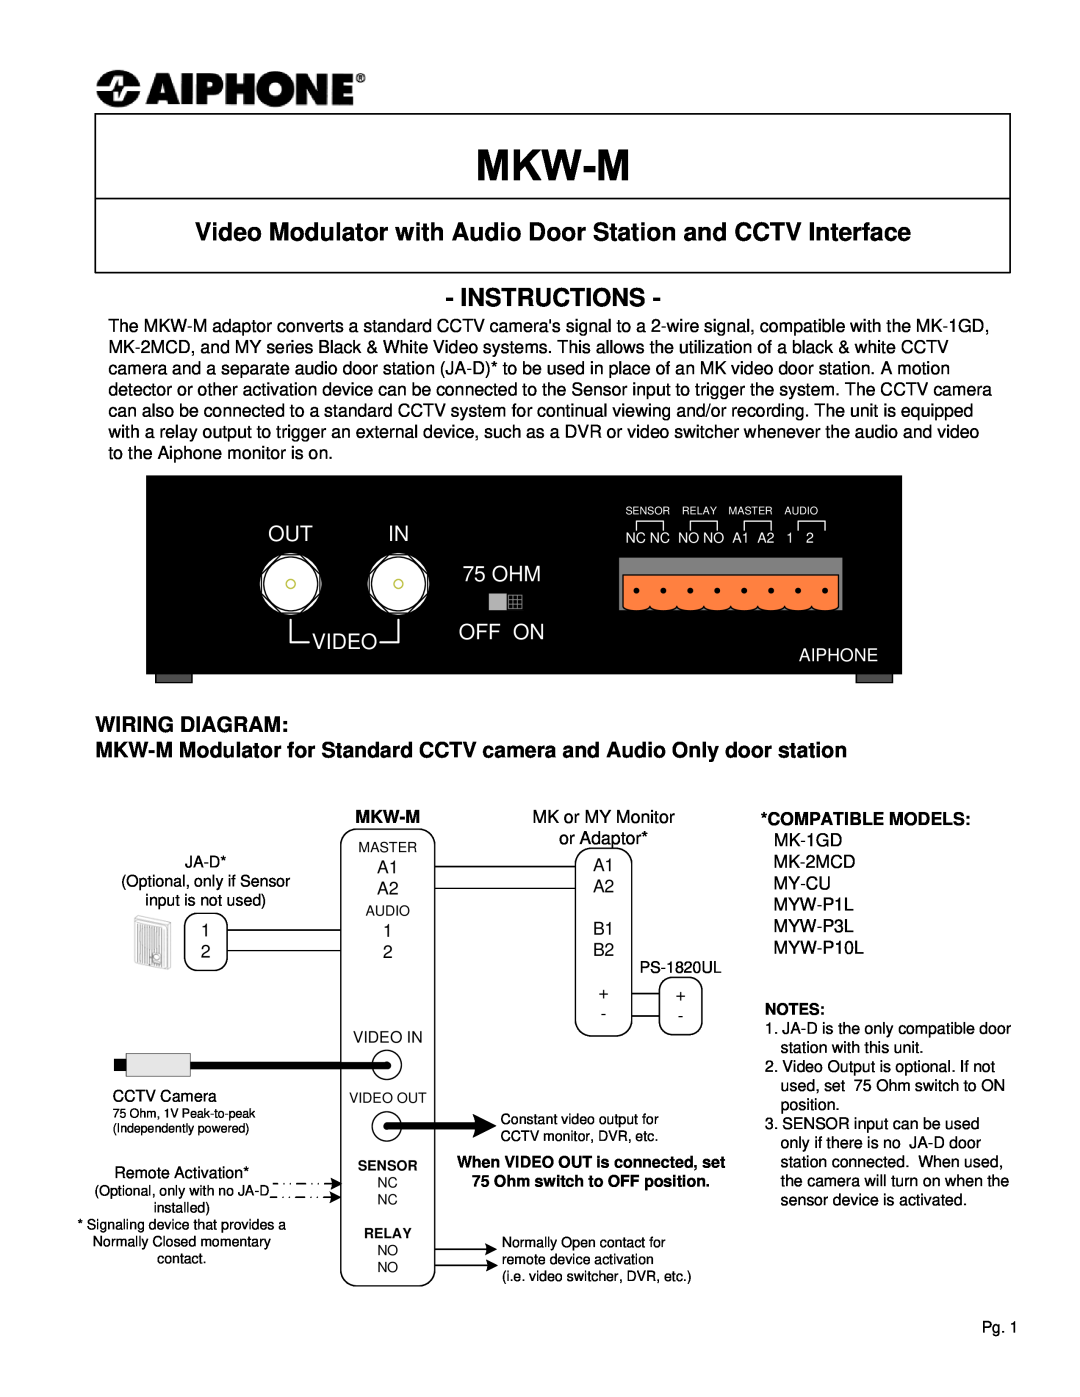 Aiphone manual Wiring Diagram, MKW-M Modulator for Standard CCTV camera and Audio Only door station, Mkw-M, 75 OHM 